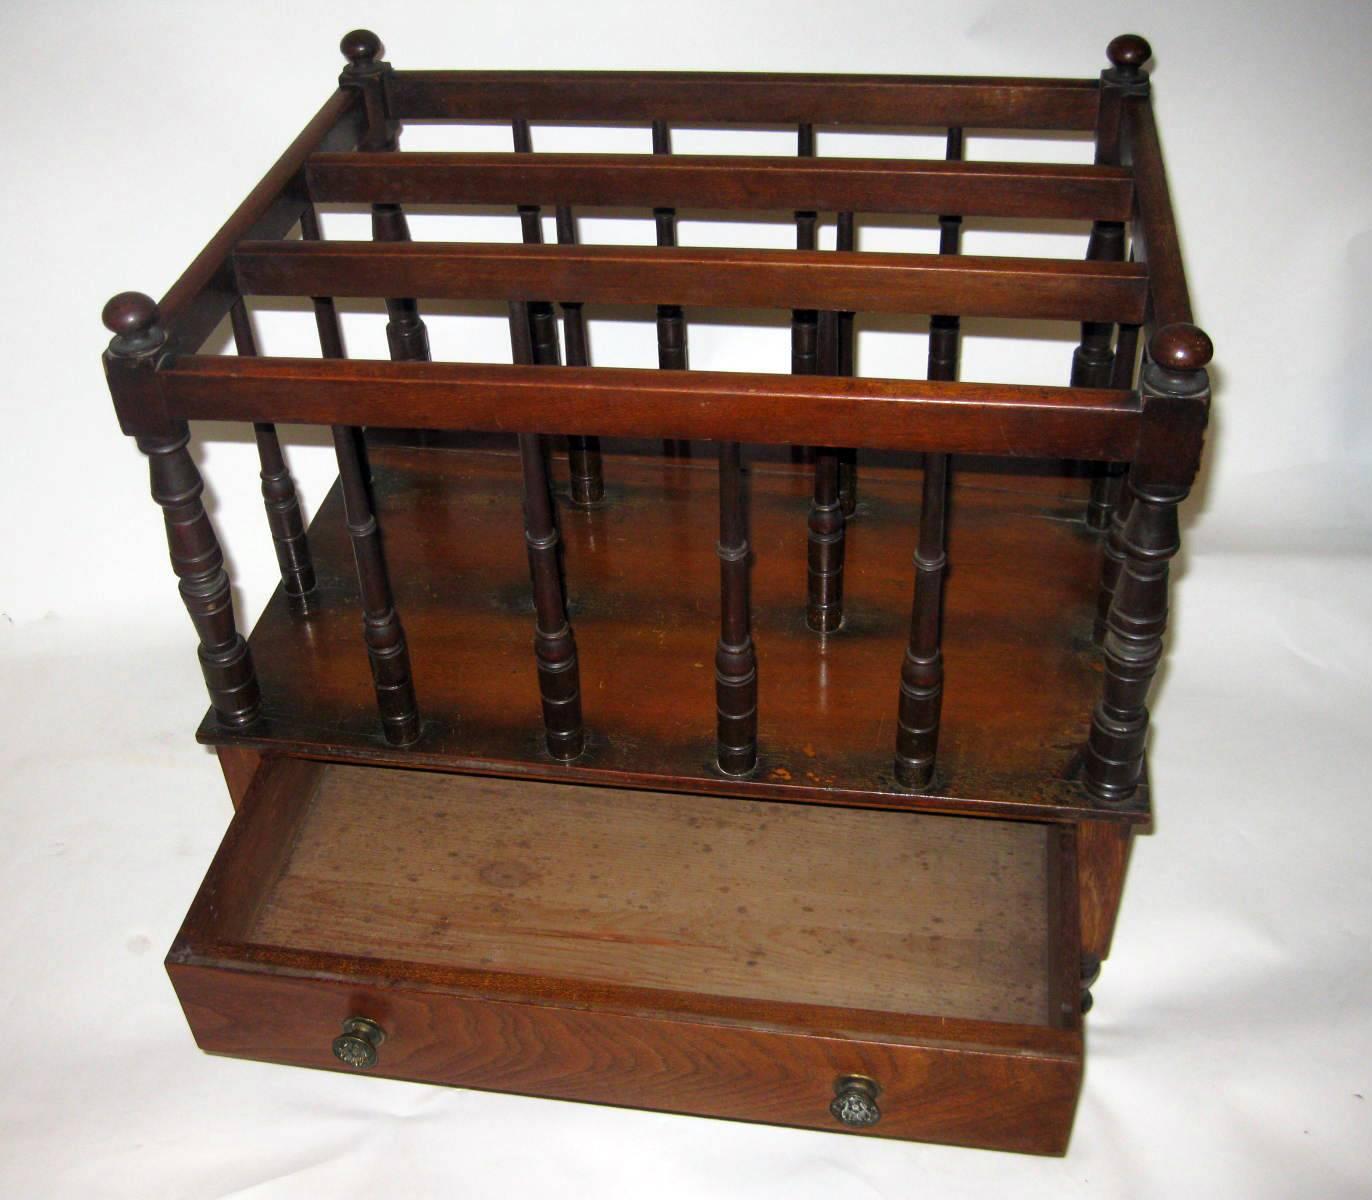 Regency period mahogany English Canterbury or magazine rack featuring turned supports, three sections and a single drawer with a secondary wood of pine on the bottom of the drawer. The fancy brass drawer pulls are original as are the brass casters